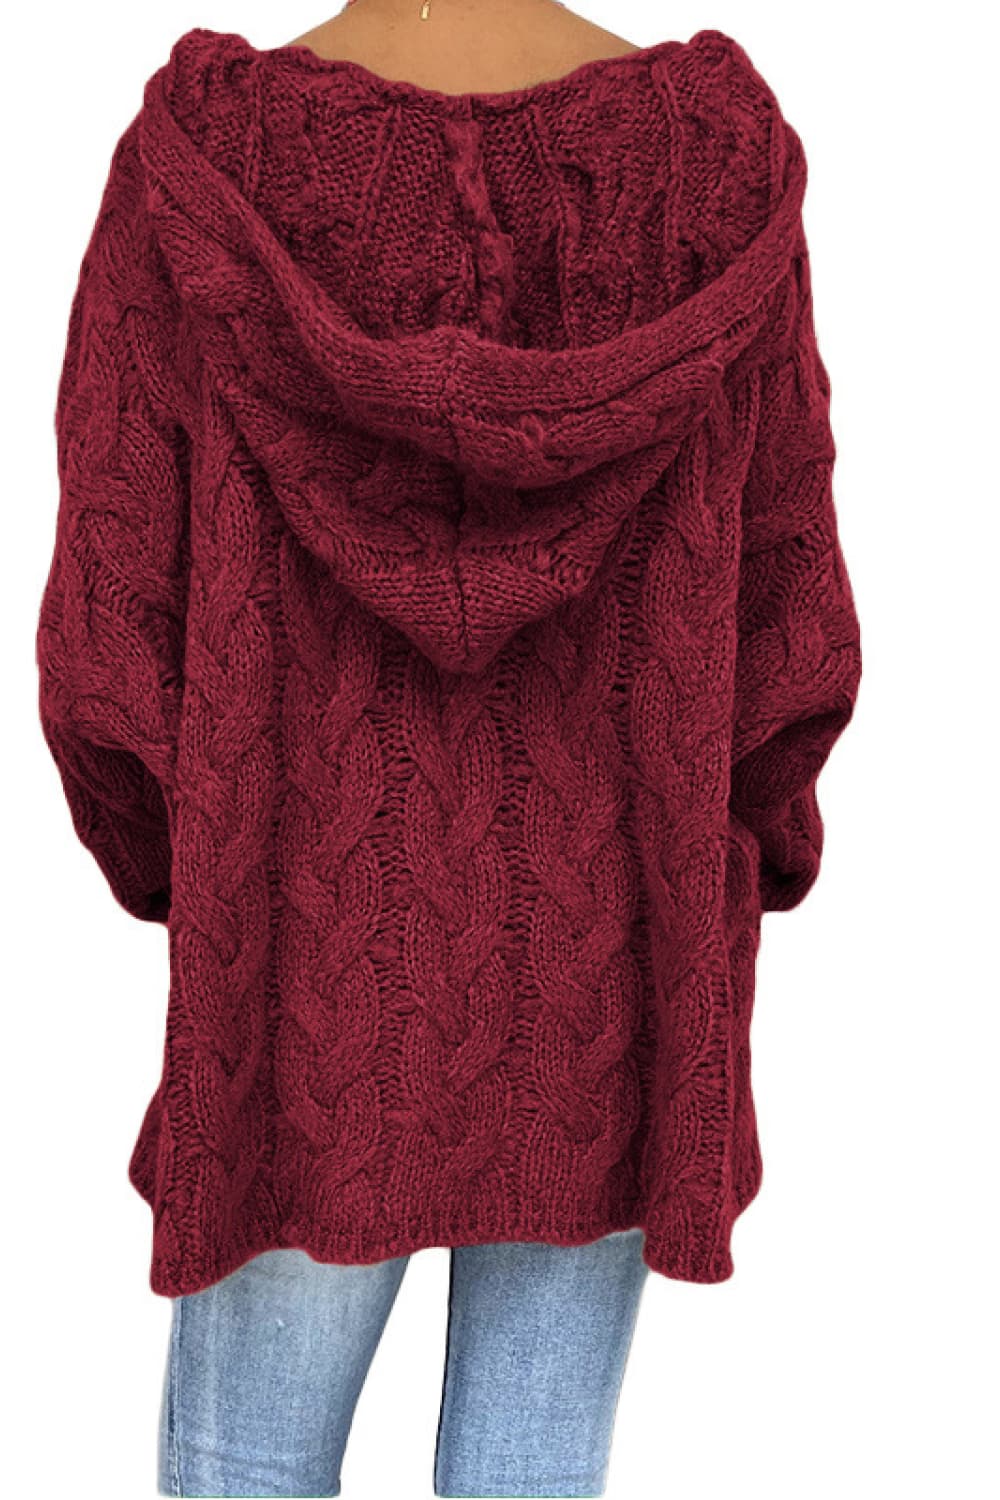 Cable-Knit Hooded Sweater - Lola Cerina Boutique